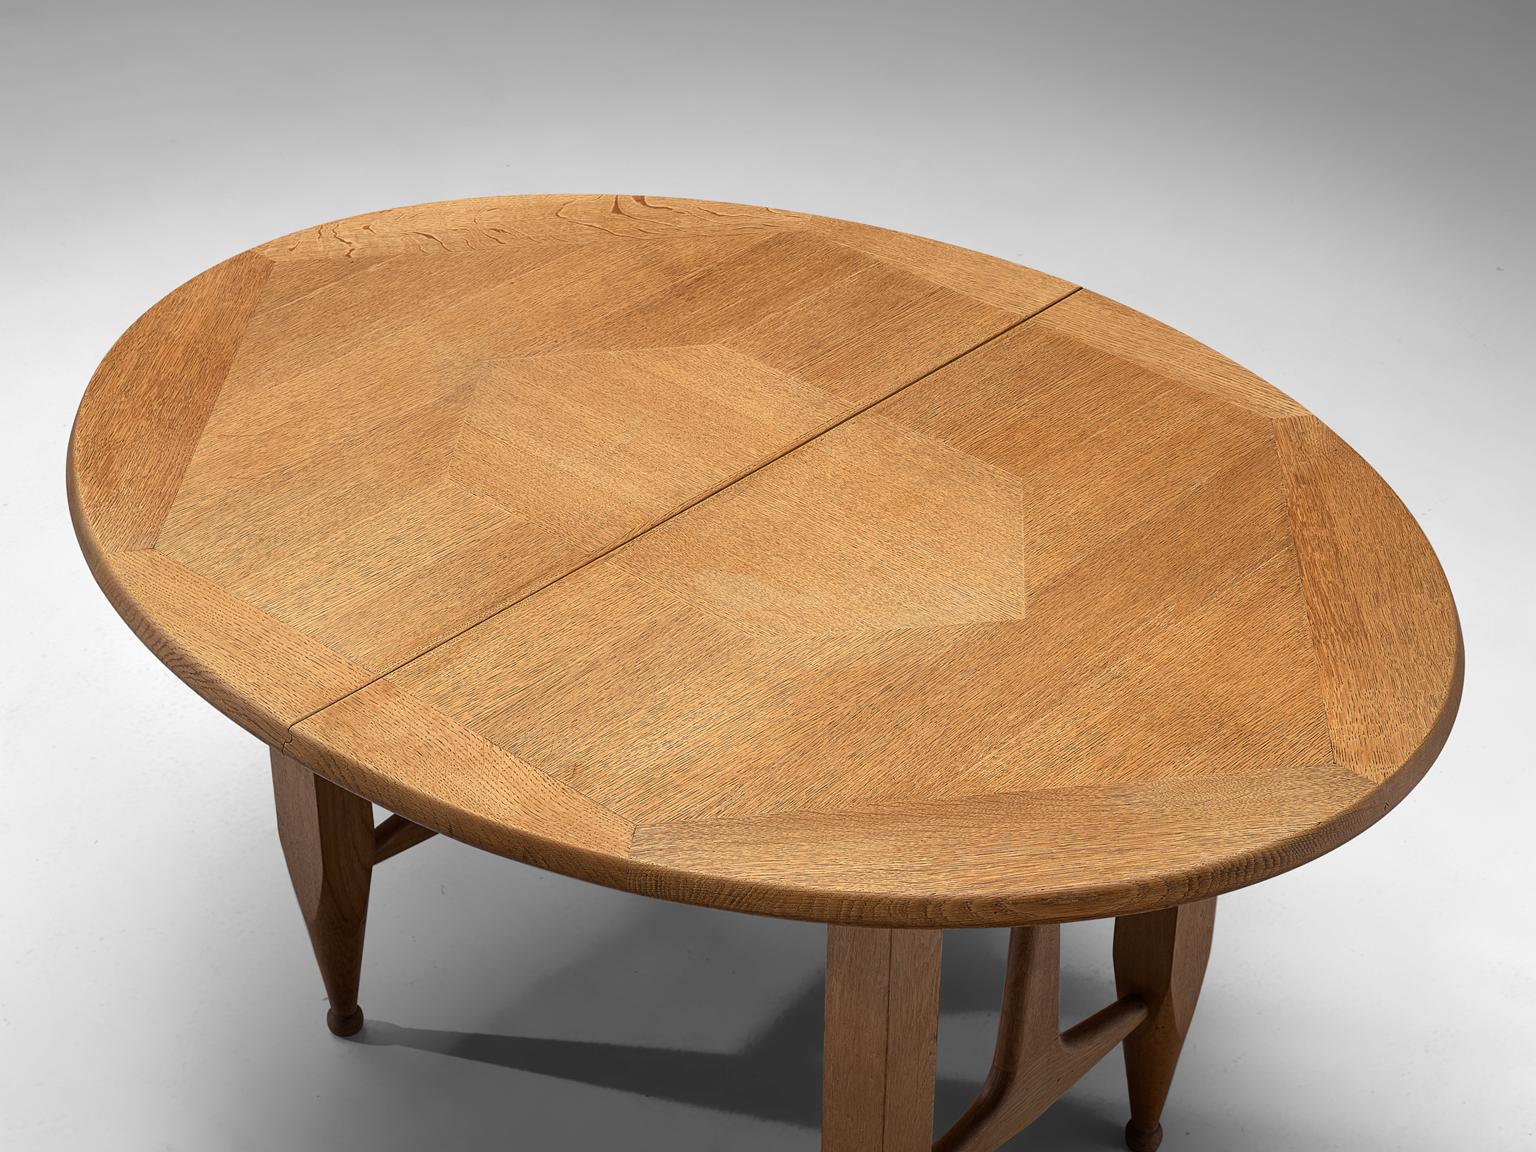 Mid-20th Century Guillerme et Chambron Extendable Dining Table in Solid Oak